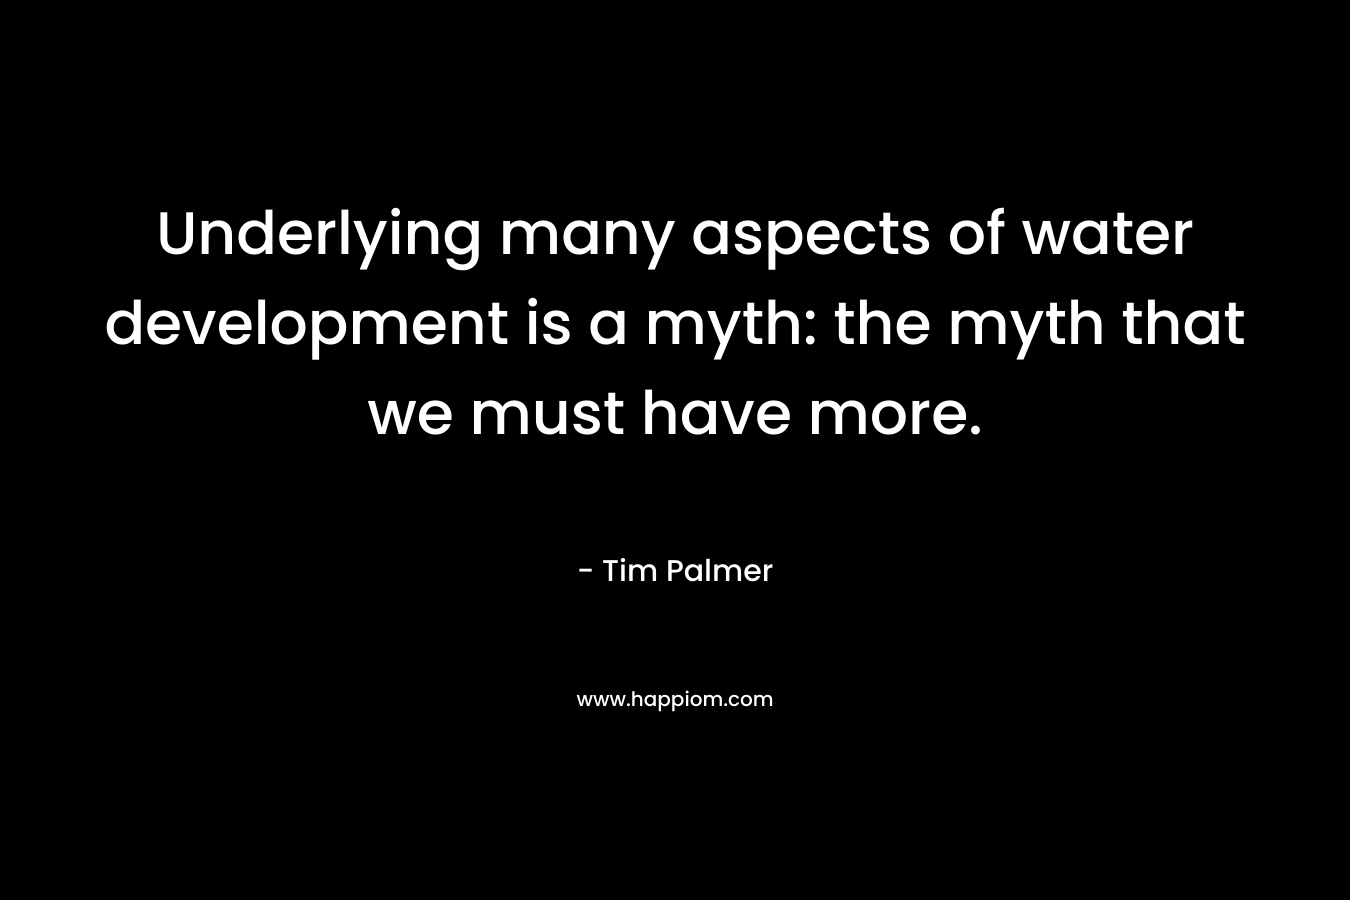 Underlying many aspects of water development is a myth: the myth that we must have more.